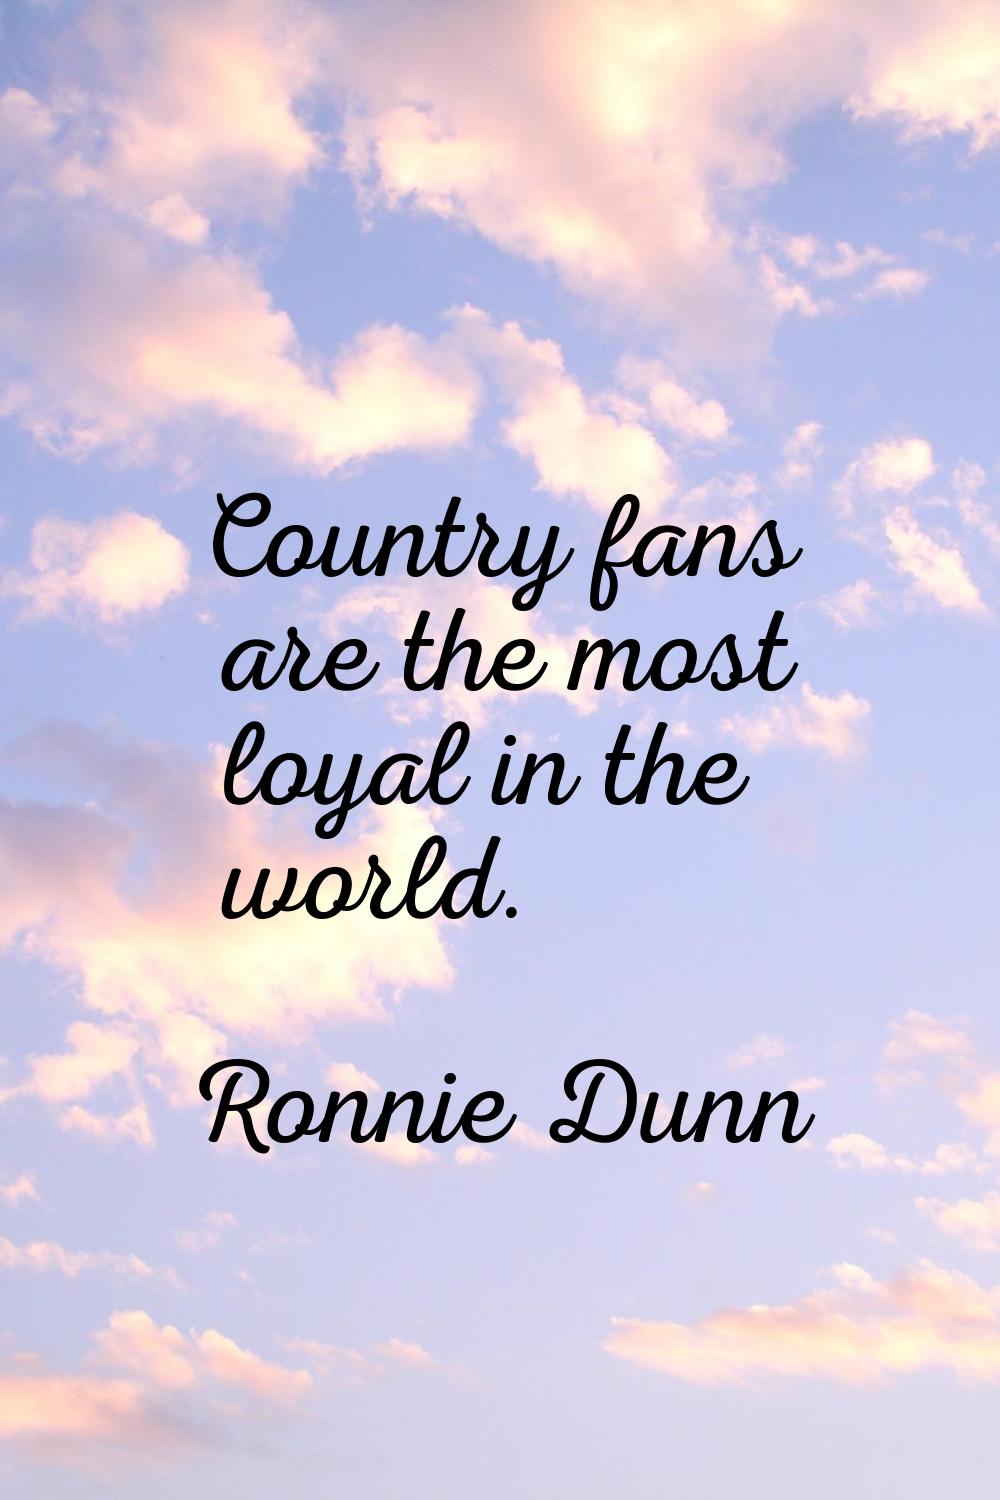 Country fans are the most loyal in the world.